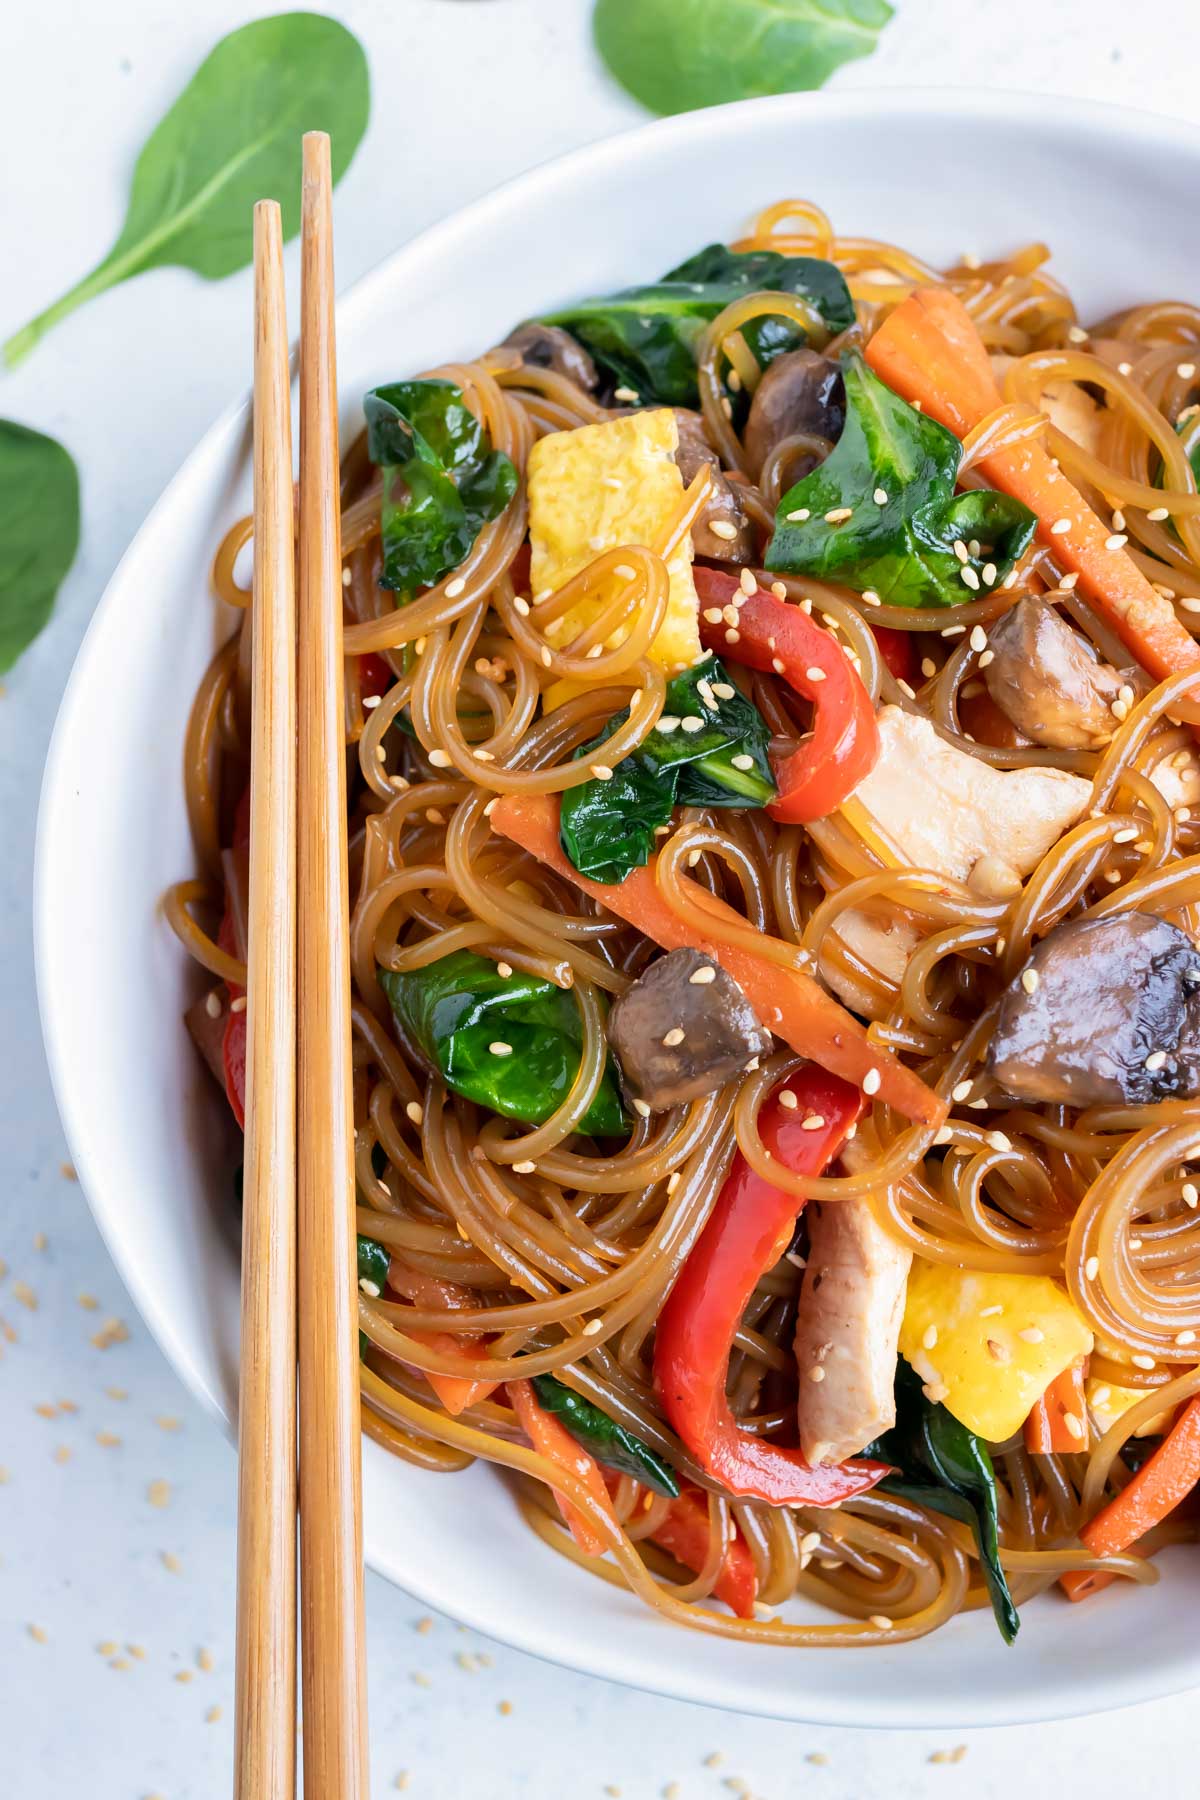 Japchae is served in a bowl for a healthy, Korean-inspired dinner.